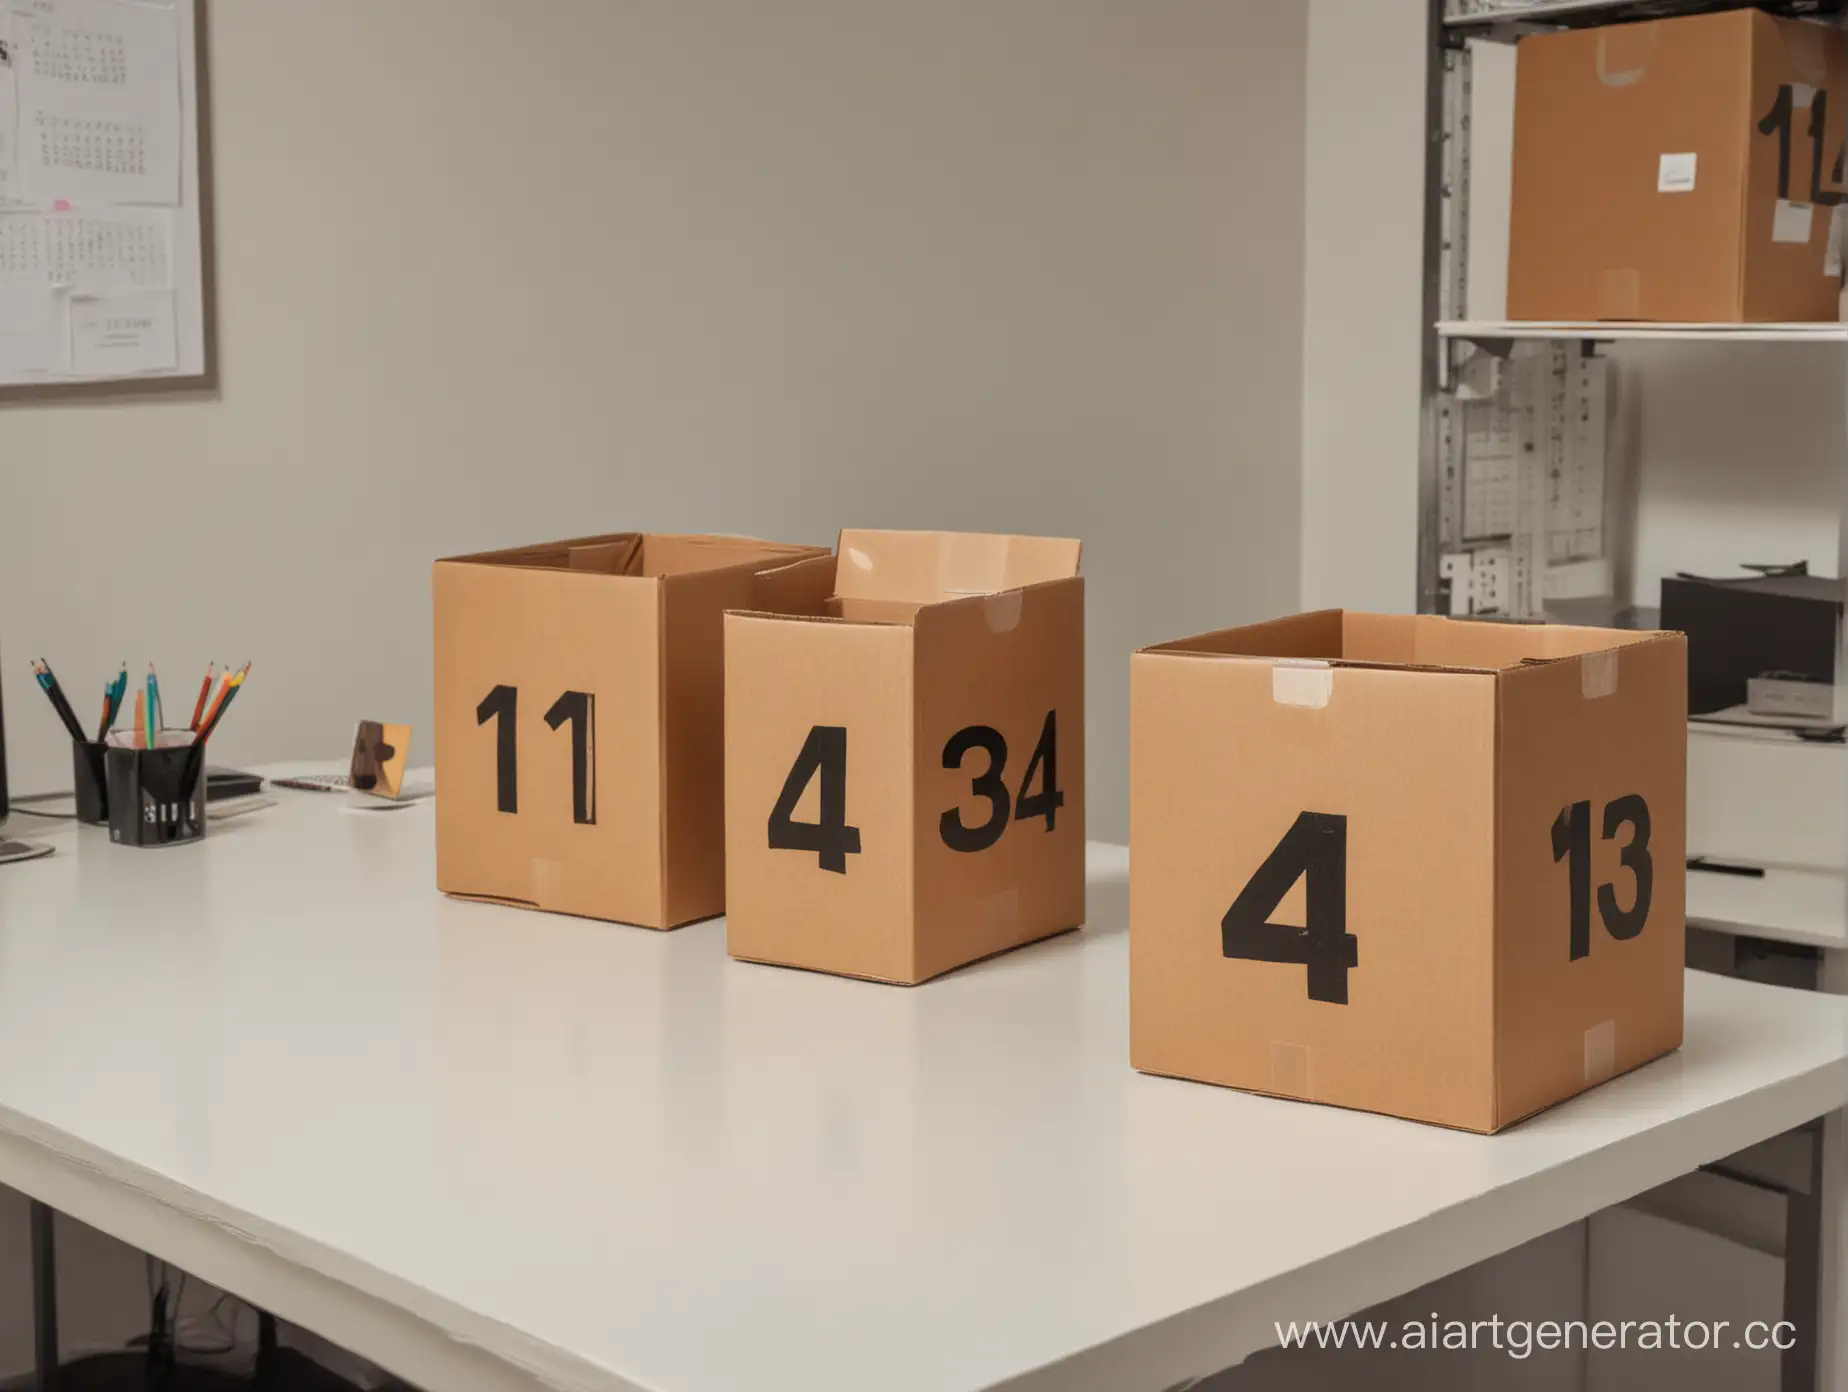 Generate a photography in an office there is an office desk. On the desk are 2 square cardboard boxes. The boxes are labeled with the numbers 113 and 114.